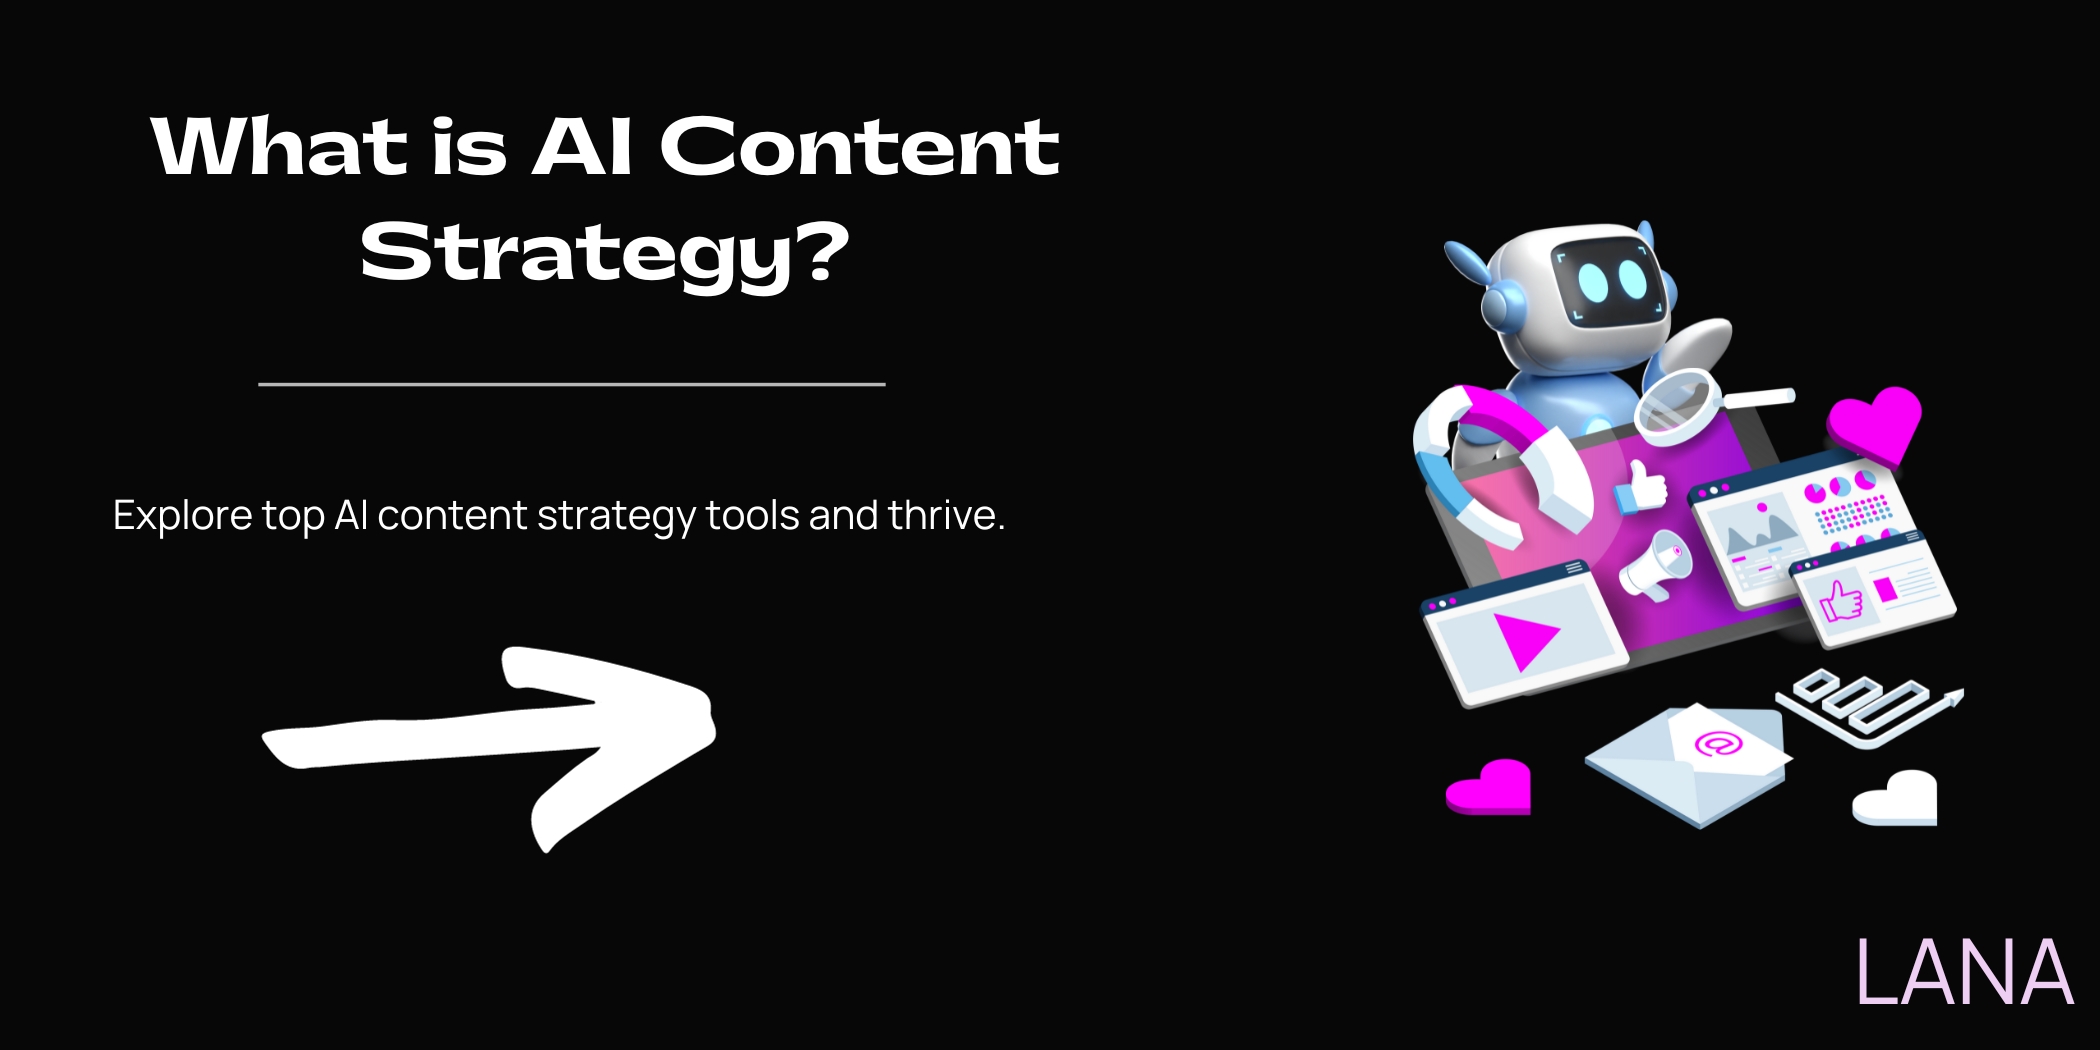 What is AI Content Strategy